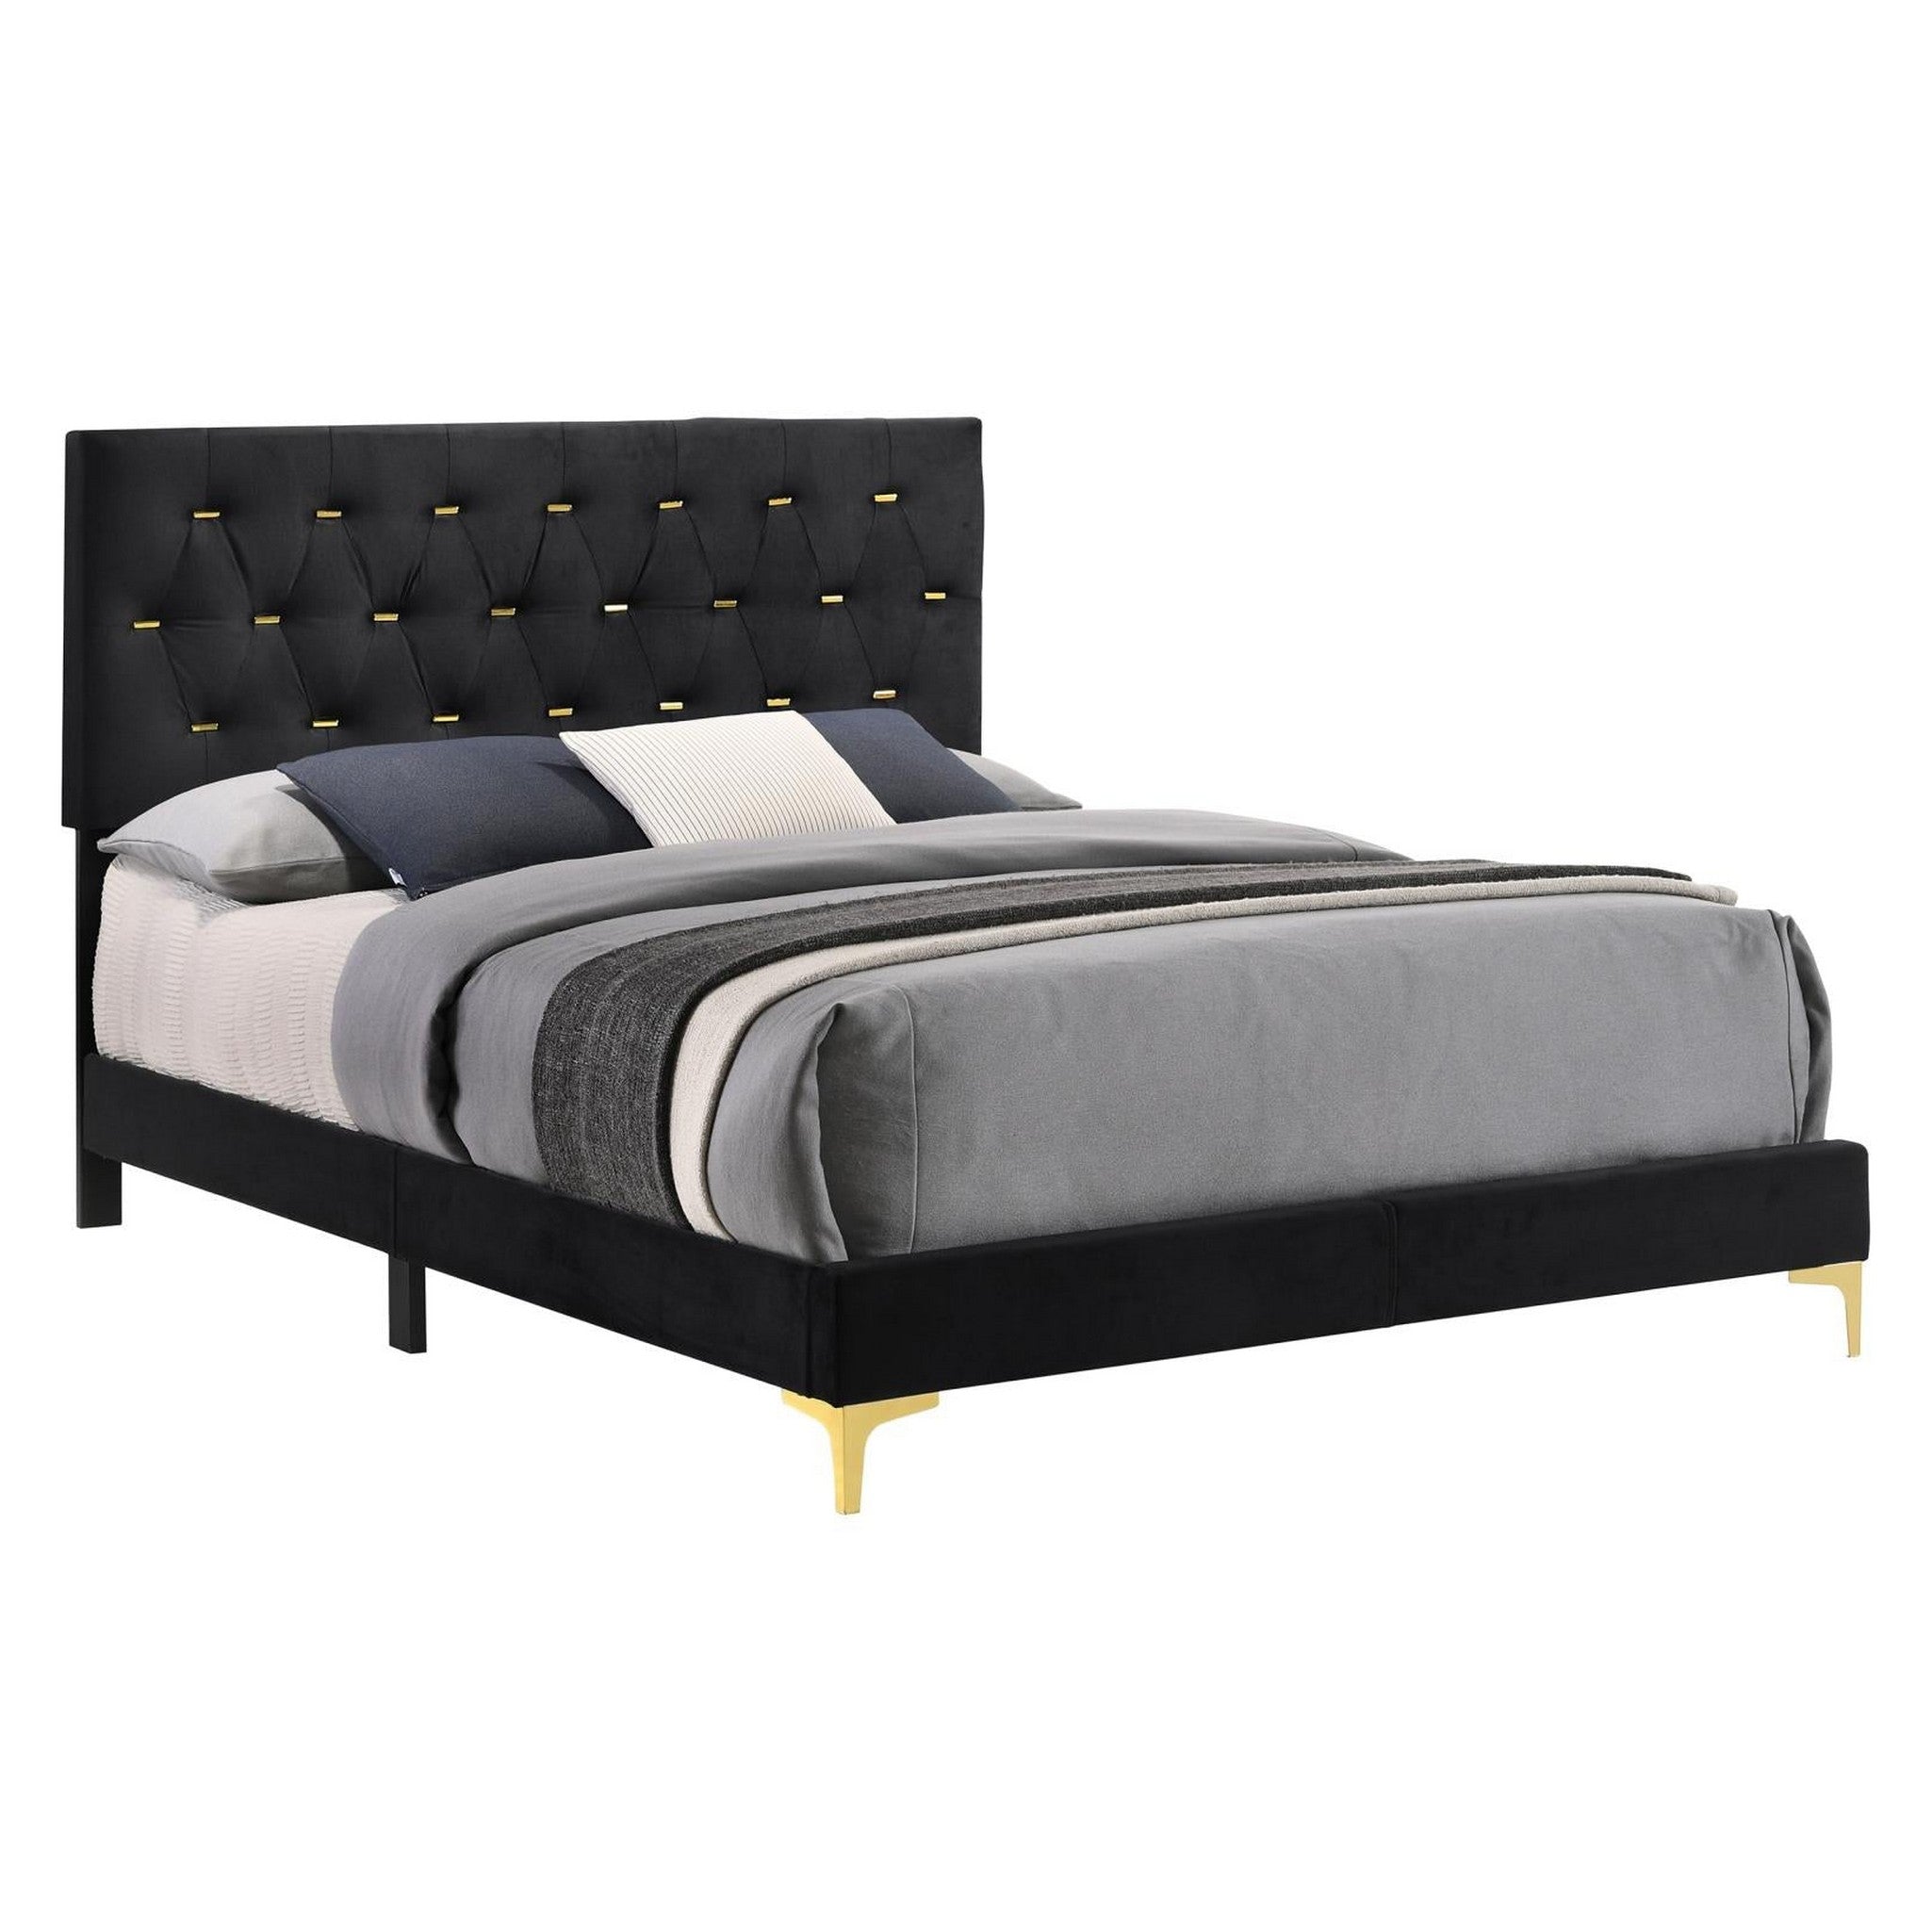 Kendall Tufted Panel California King Bed Black and Gold 224451KW